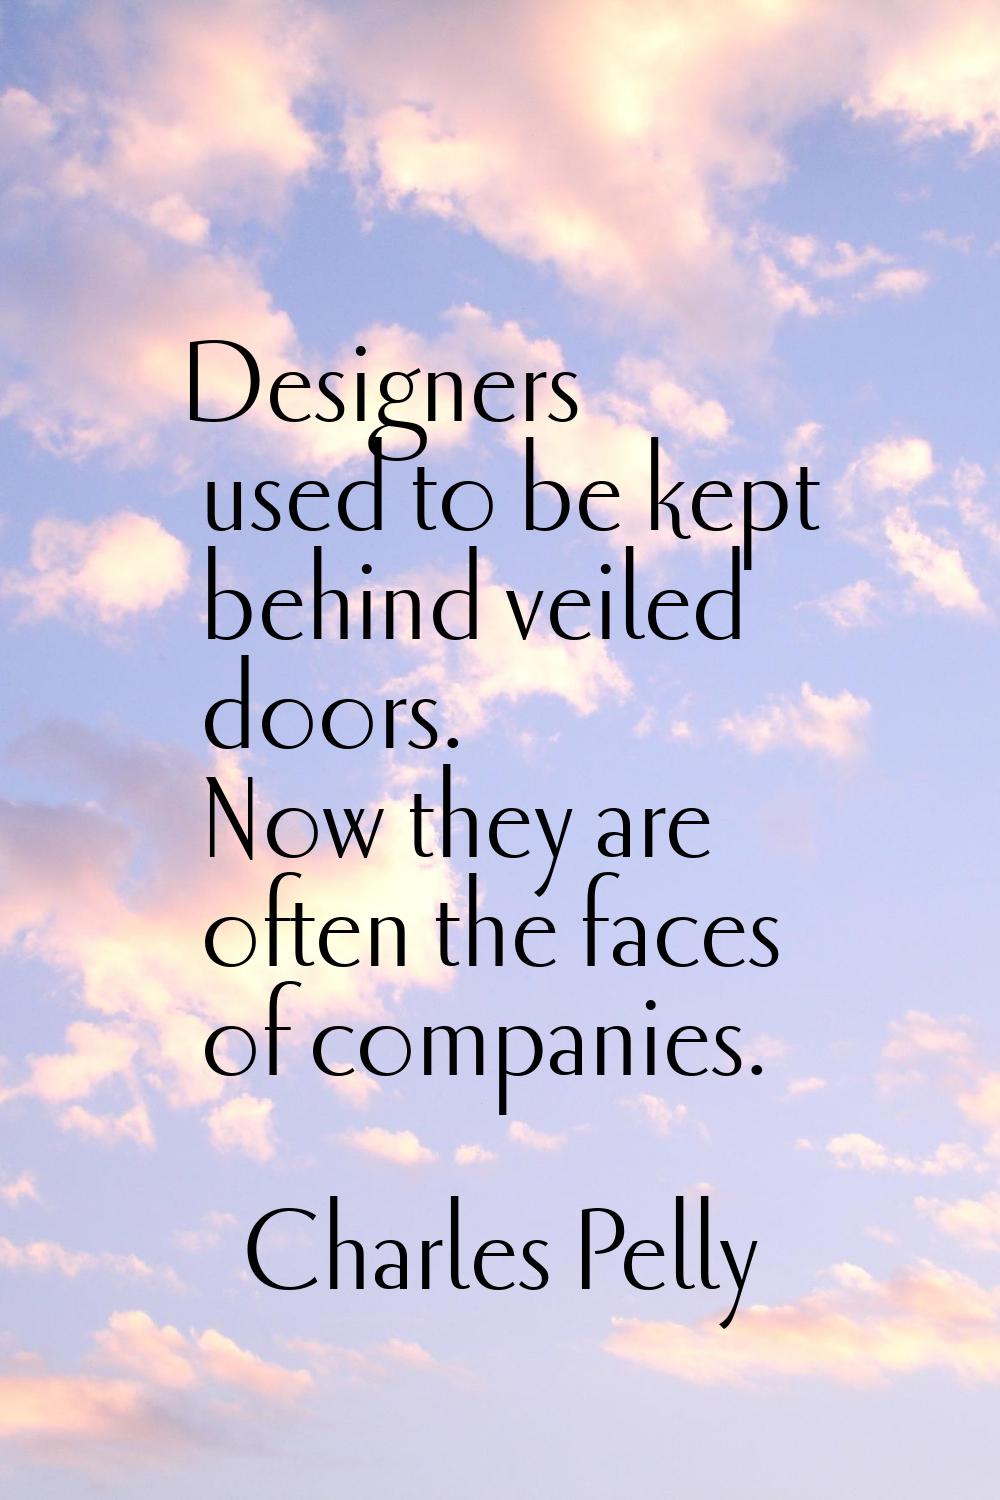 Designers used to be kept behind veiled doors. Now they are often the faces of companies.